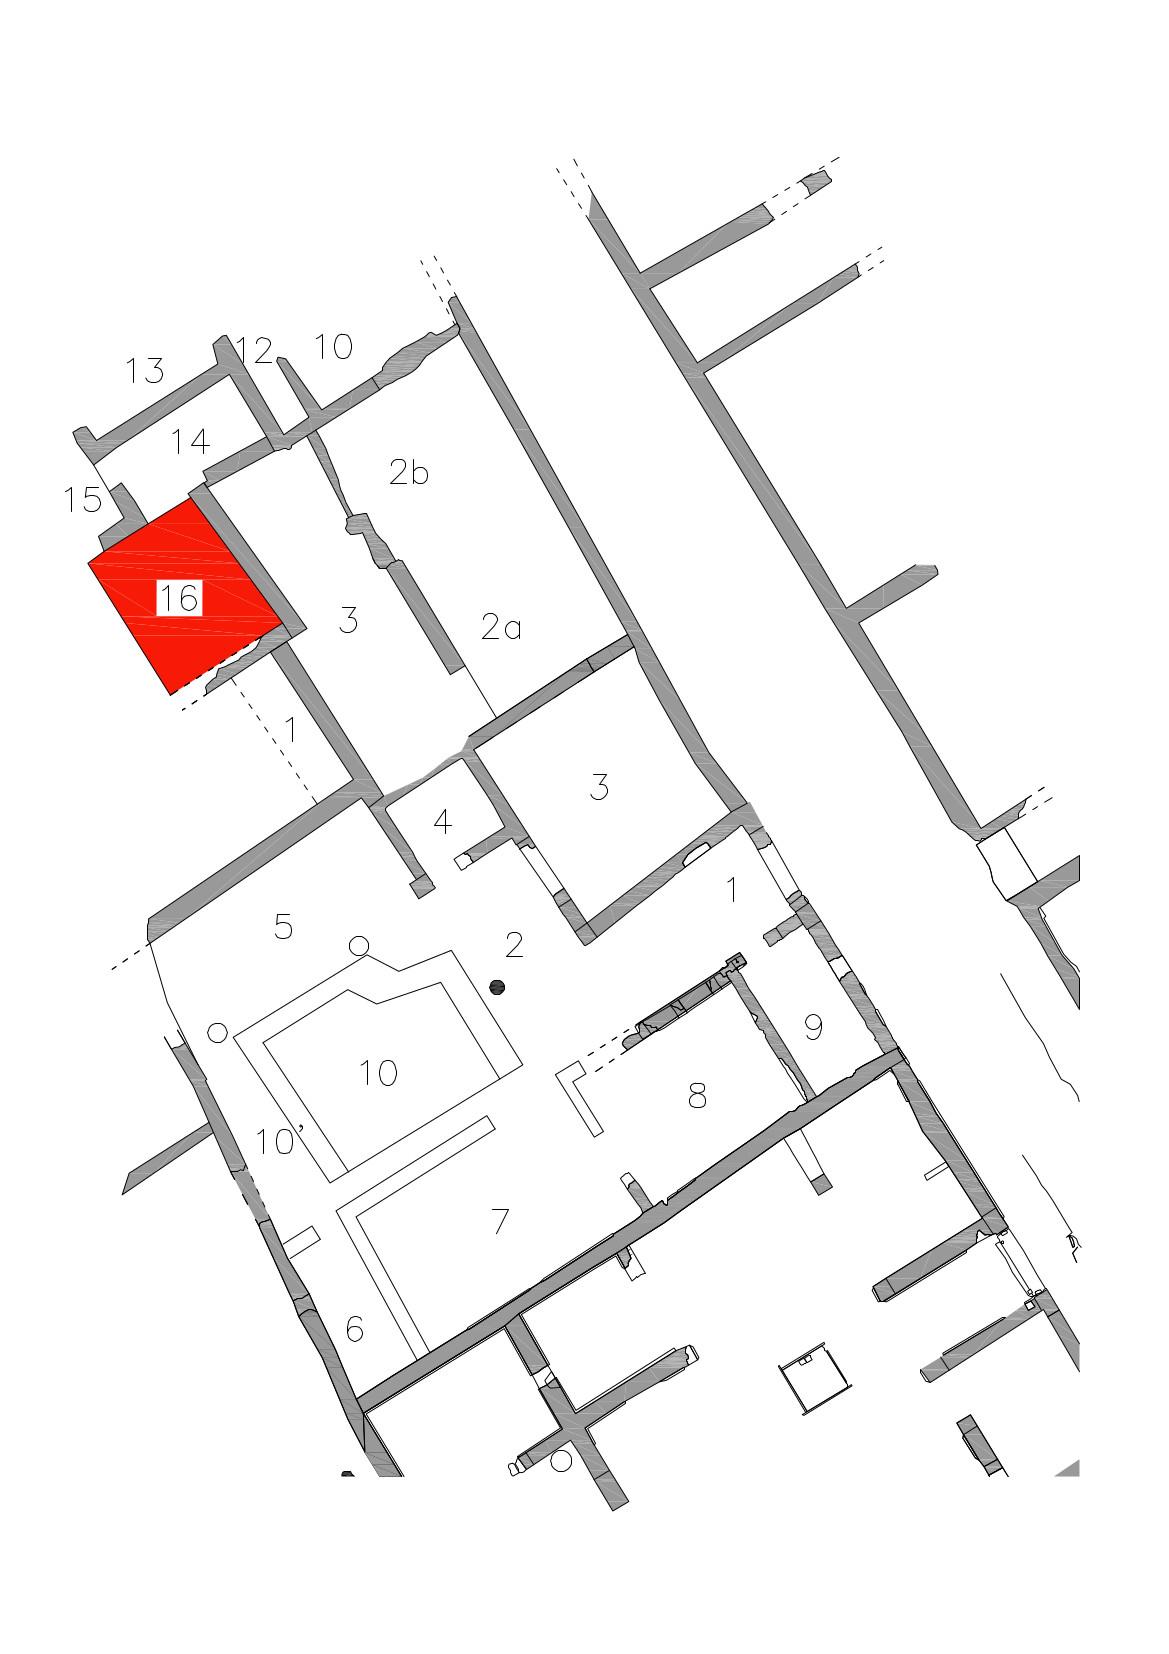 V.3.12 Pompeii. Drawing of plan based on PPM, III, p. 961.
According to the Parco Archeologico di Pompei press release the lararium excavated in 2018 was to the north of this plan.
